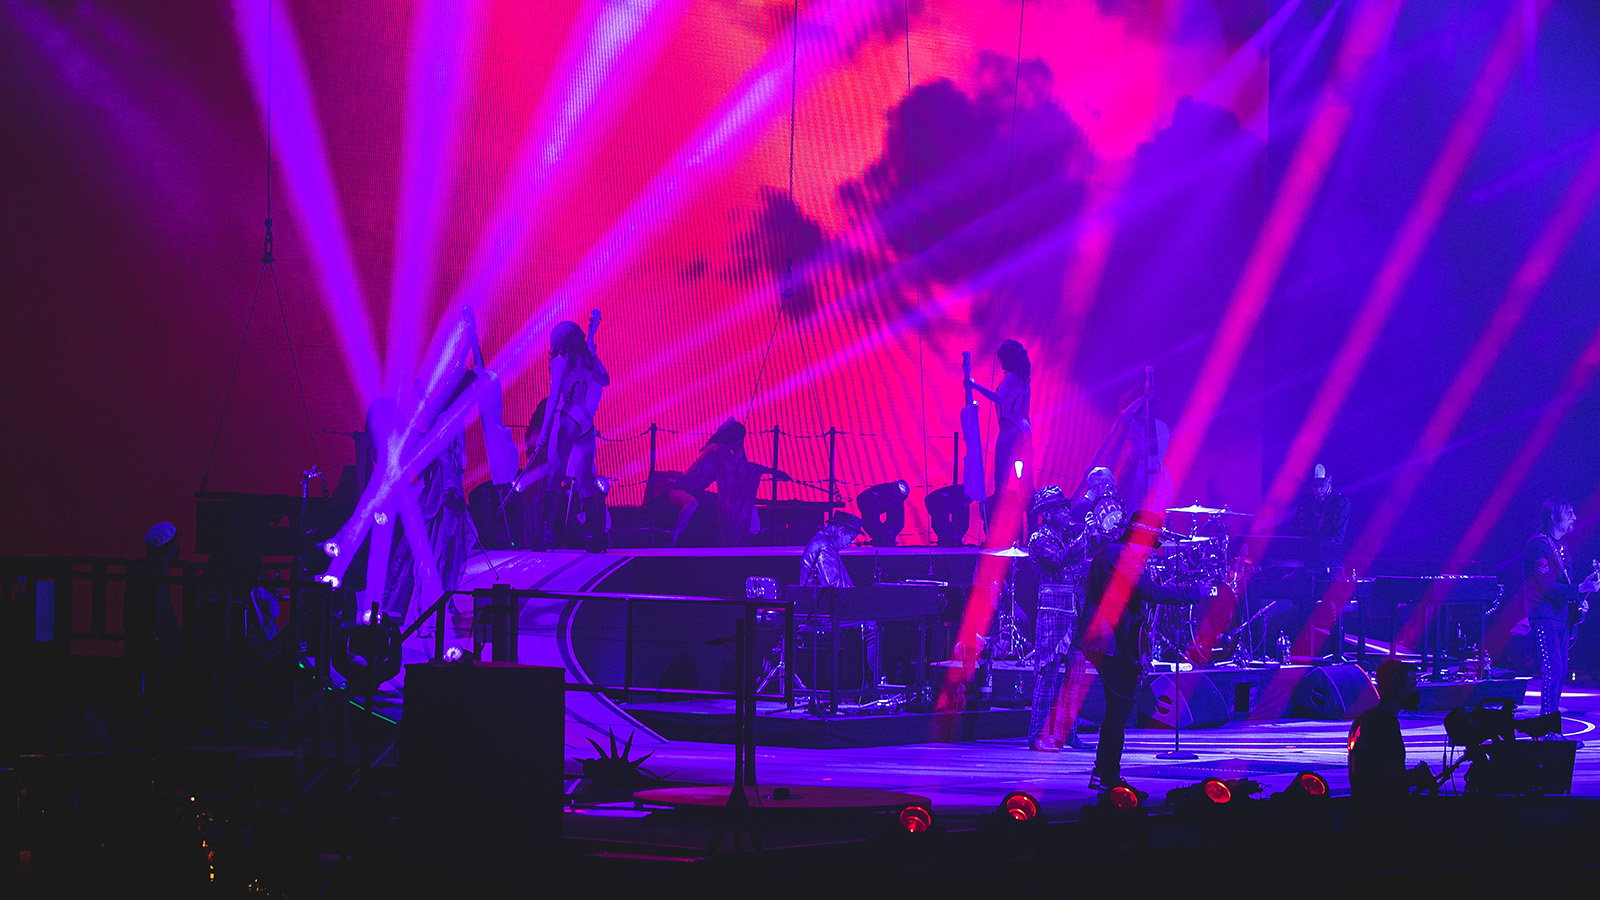 GLP delivers flexibility, energy efficiency and ‘under-hat’ lighting for Udo Lindenberg’s Udopium Live tour